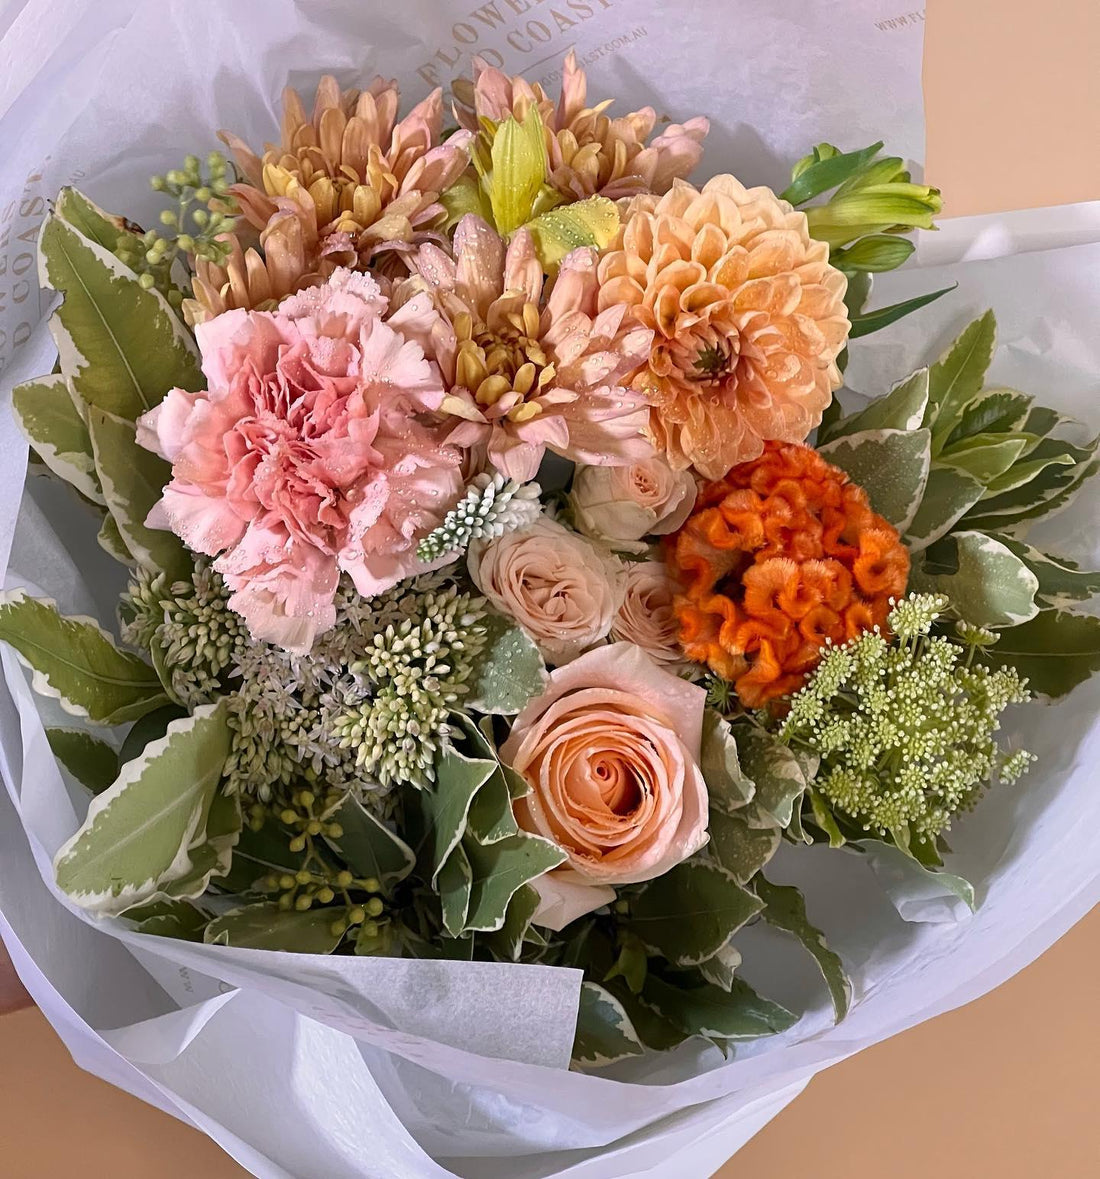 P E A C H Y 

Get Mum our Peachy bouquet this Sunday 8th May 🍑

Head to our website to secure you made with love by Flowers Gold Coast www.flowersgoldcoast.com.au the Gold Coast's best Florist